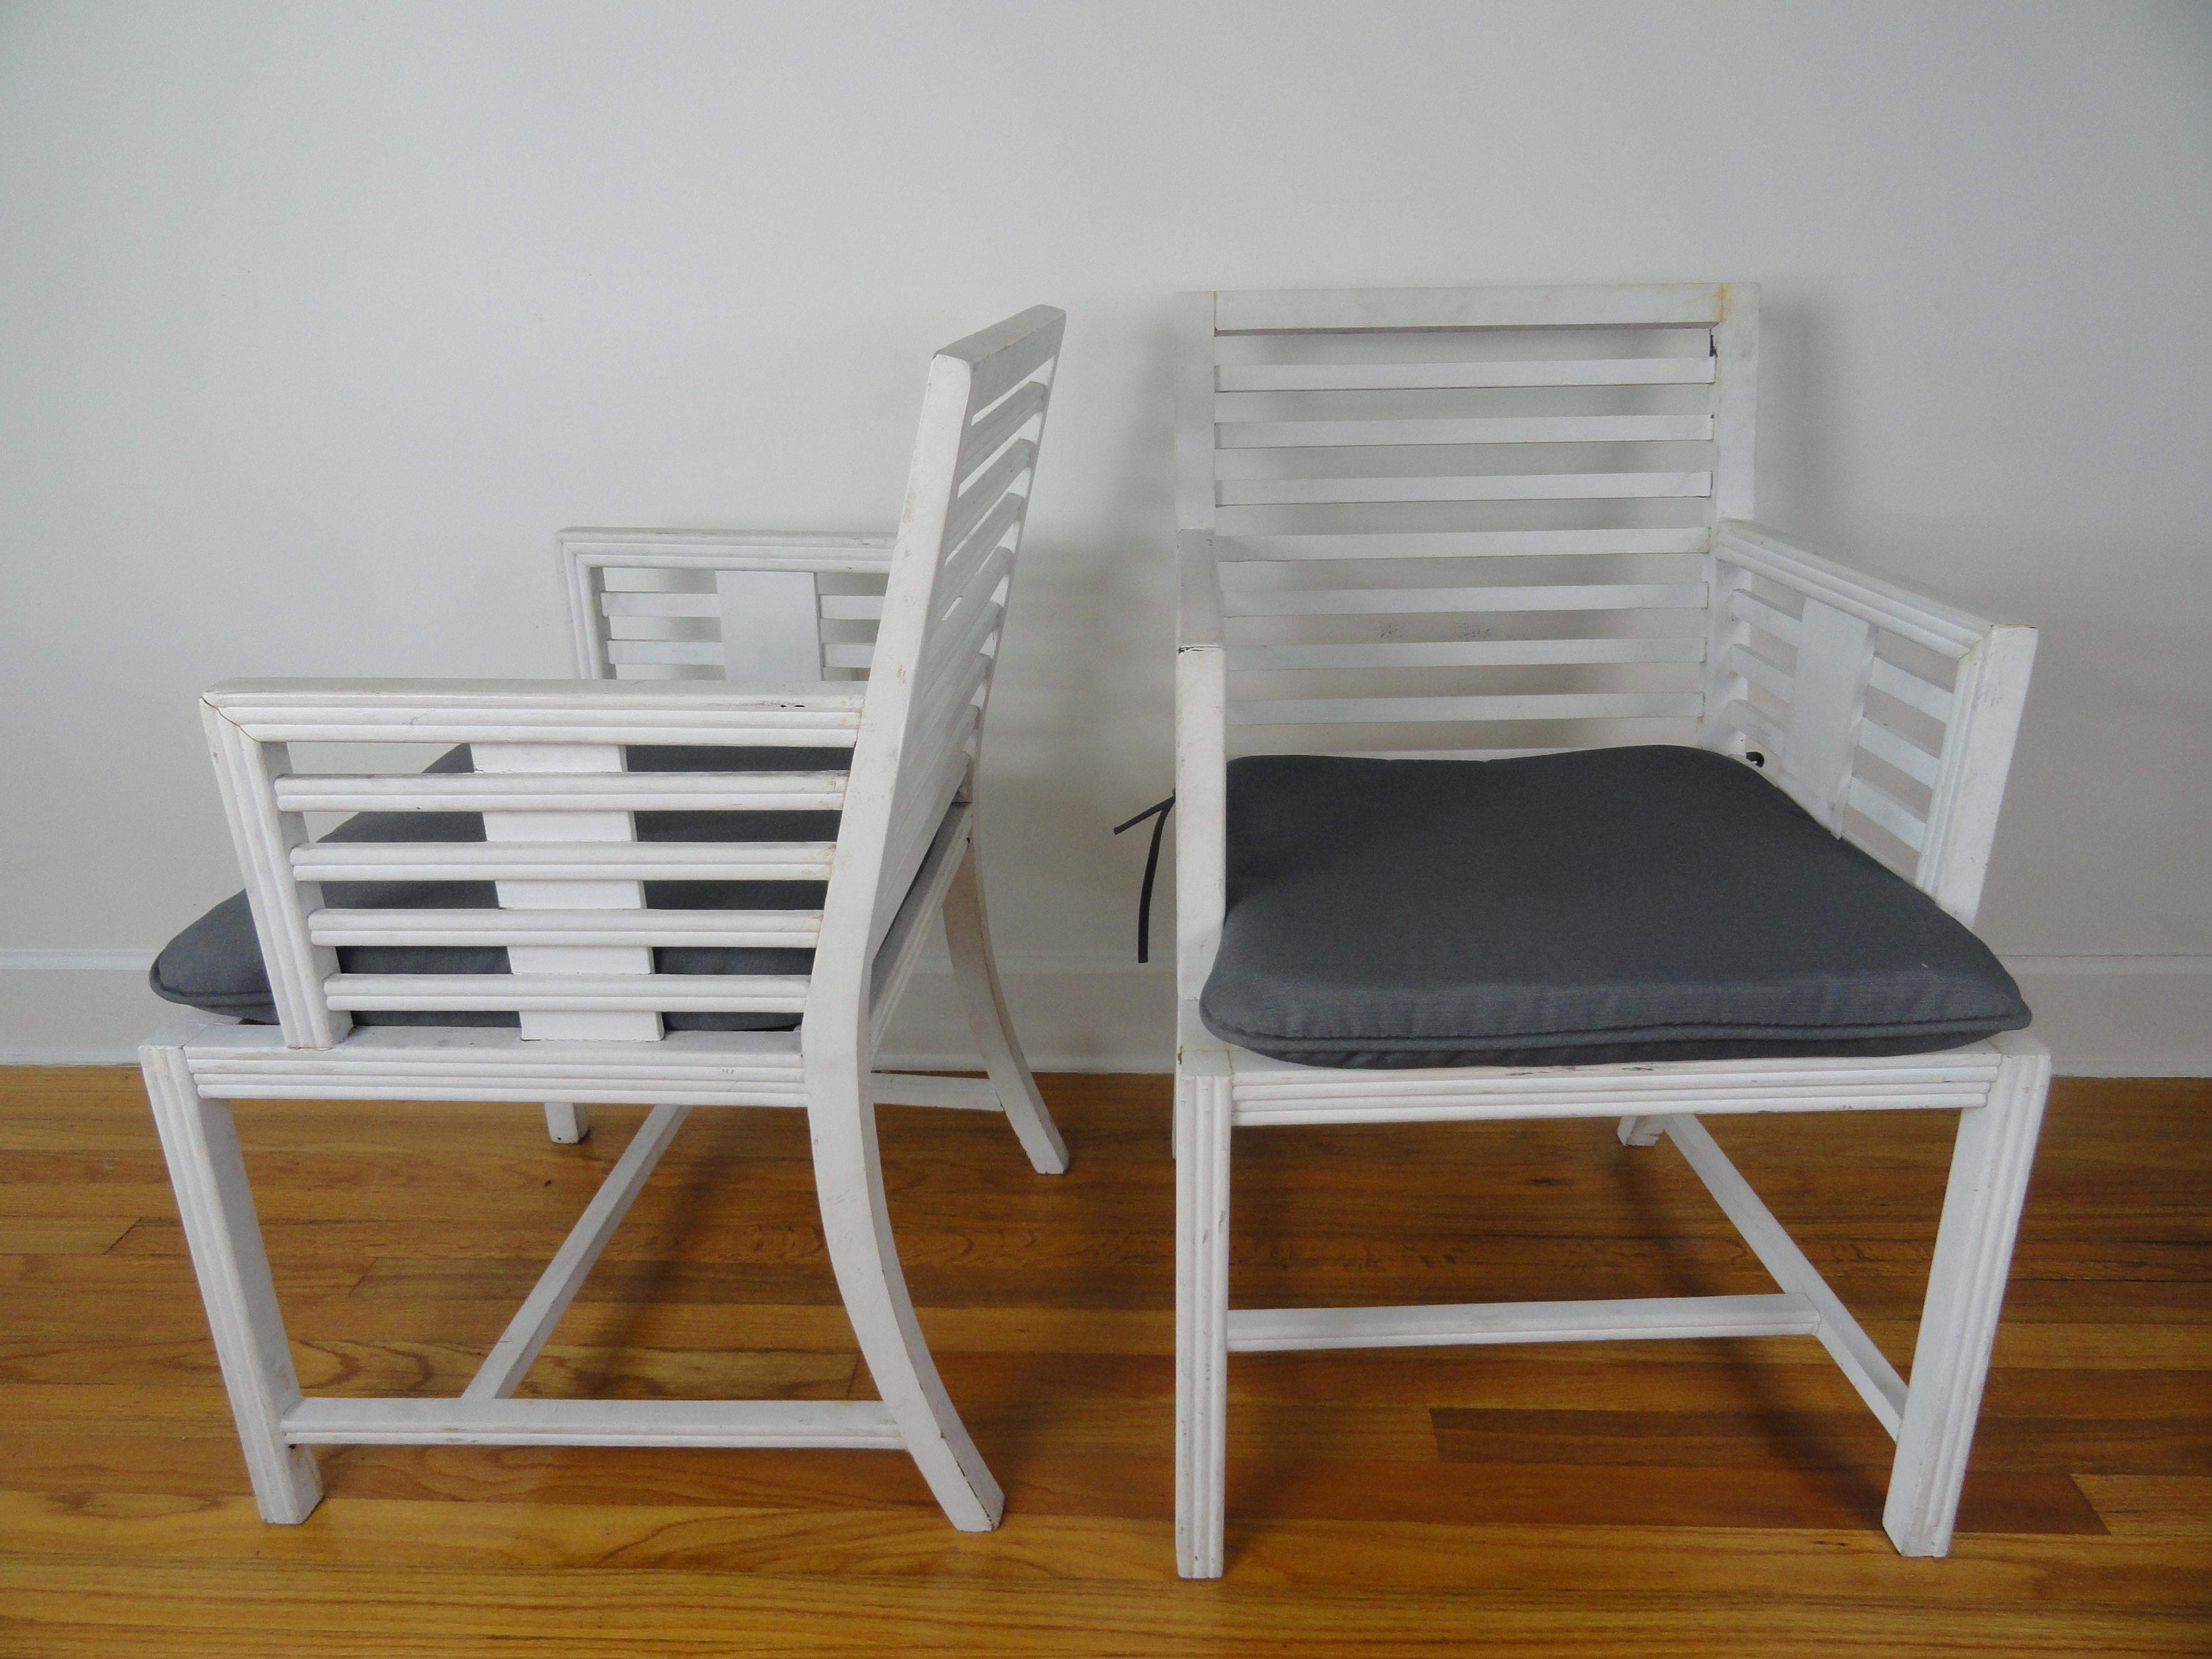 Pair of wood slat armchairs from the 1940s. Painted white. New gray cushions. Bottom stretcher.